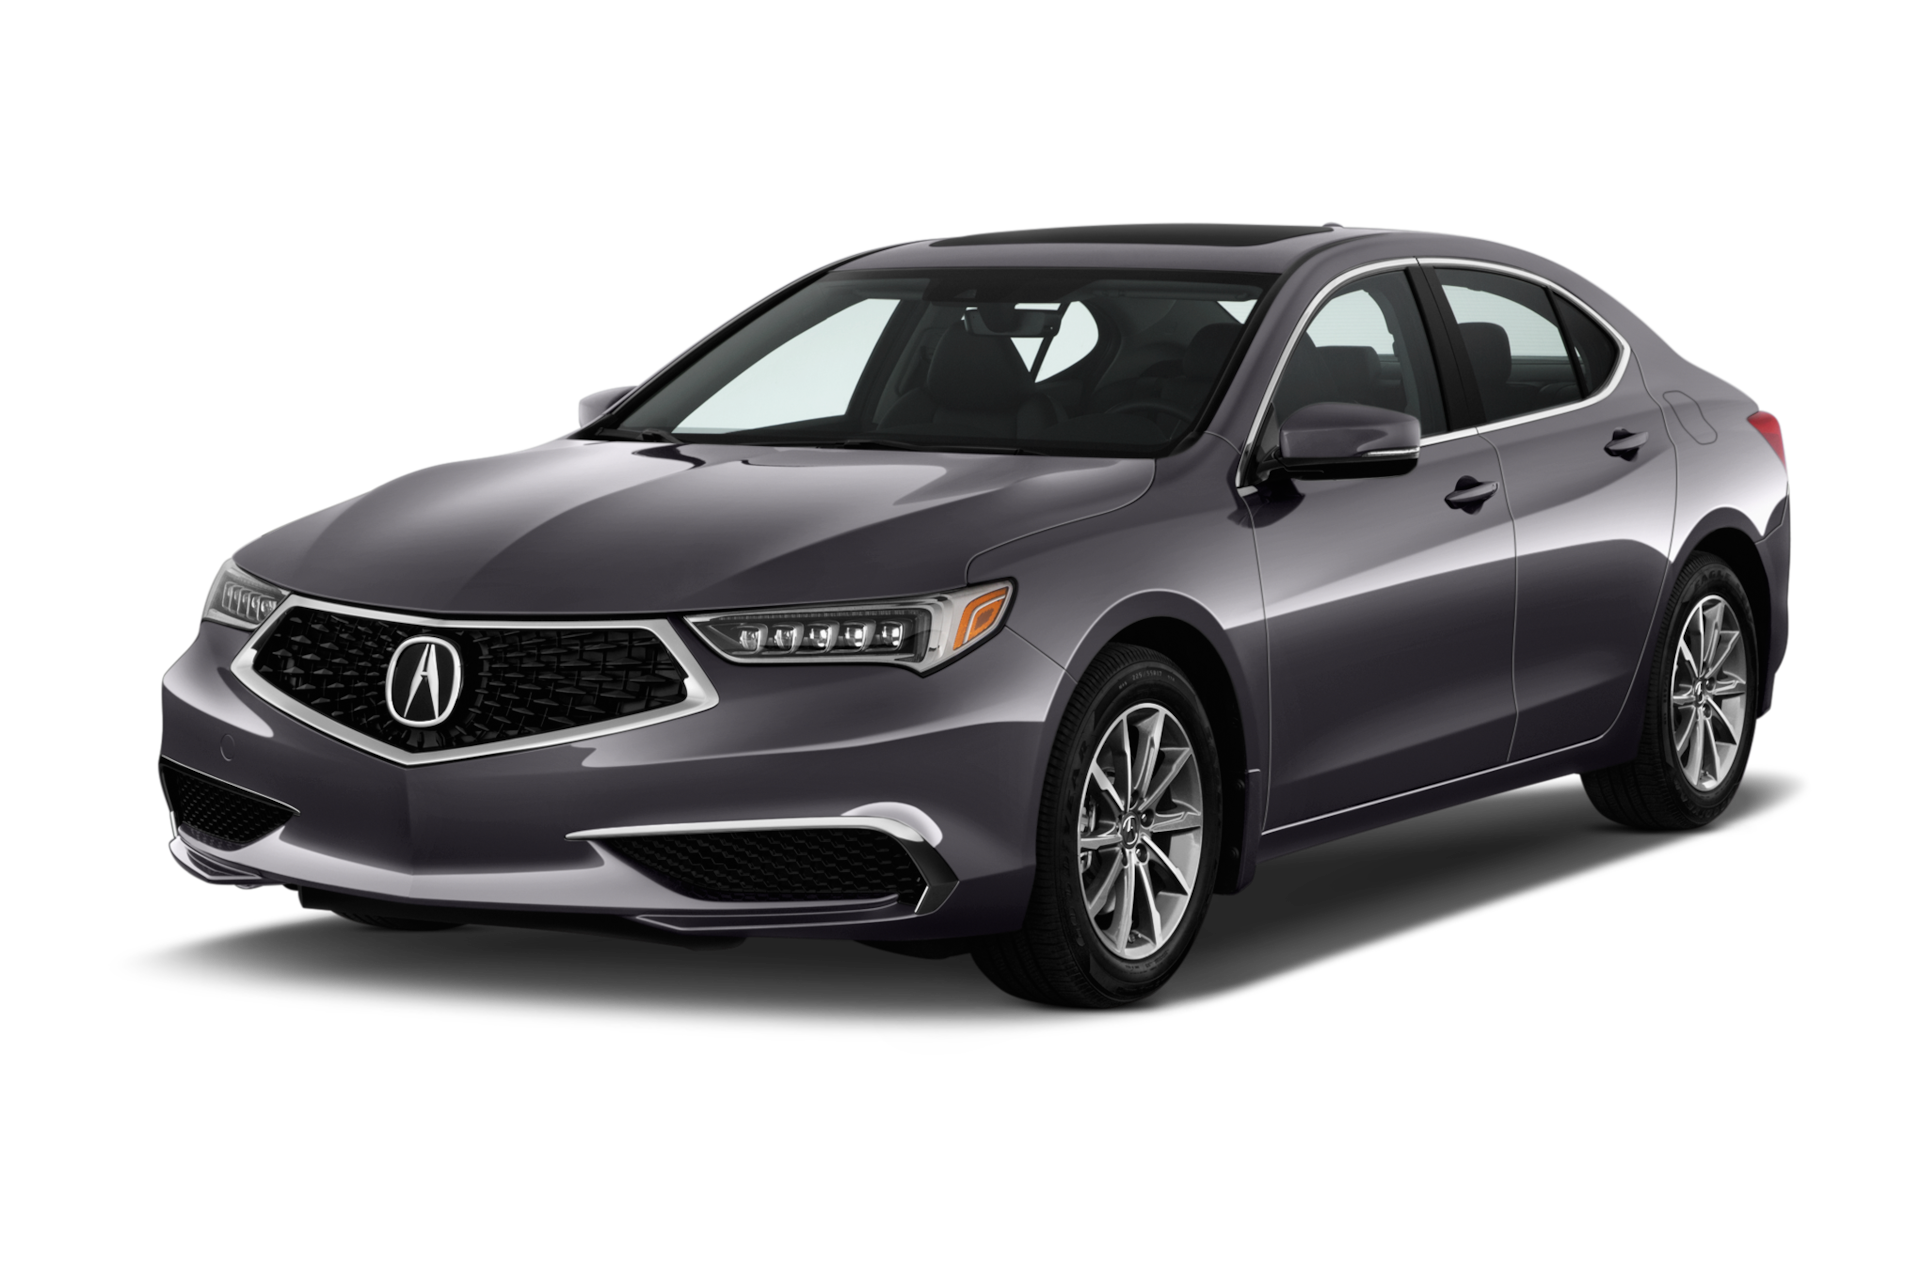 2018 Acura TLX Prices, Reviews, and Photos - MotorTrend